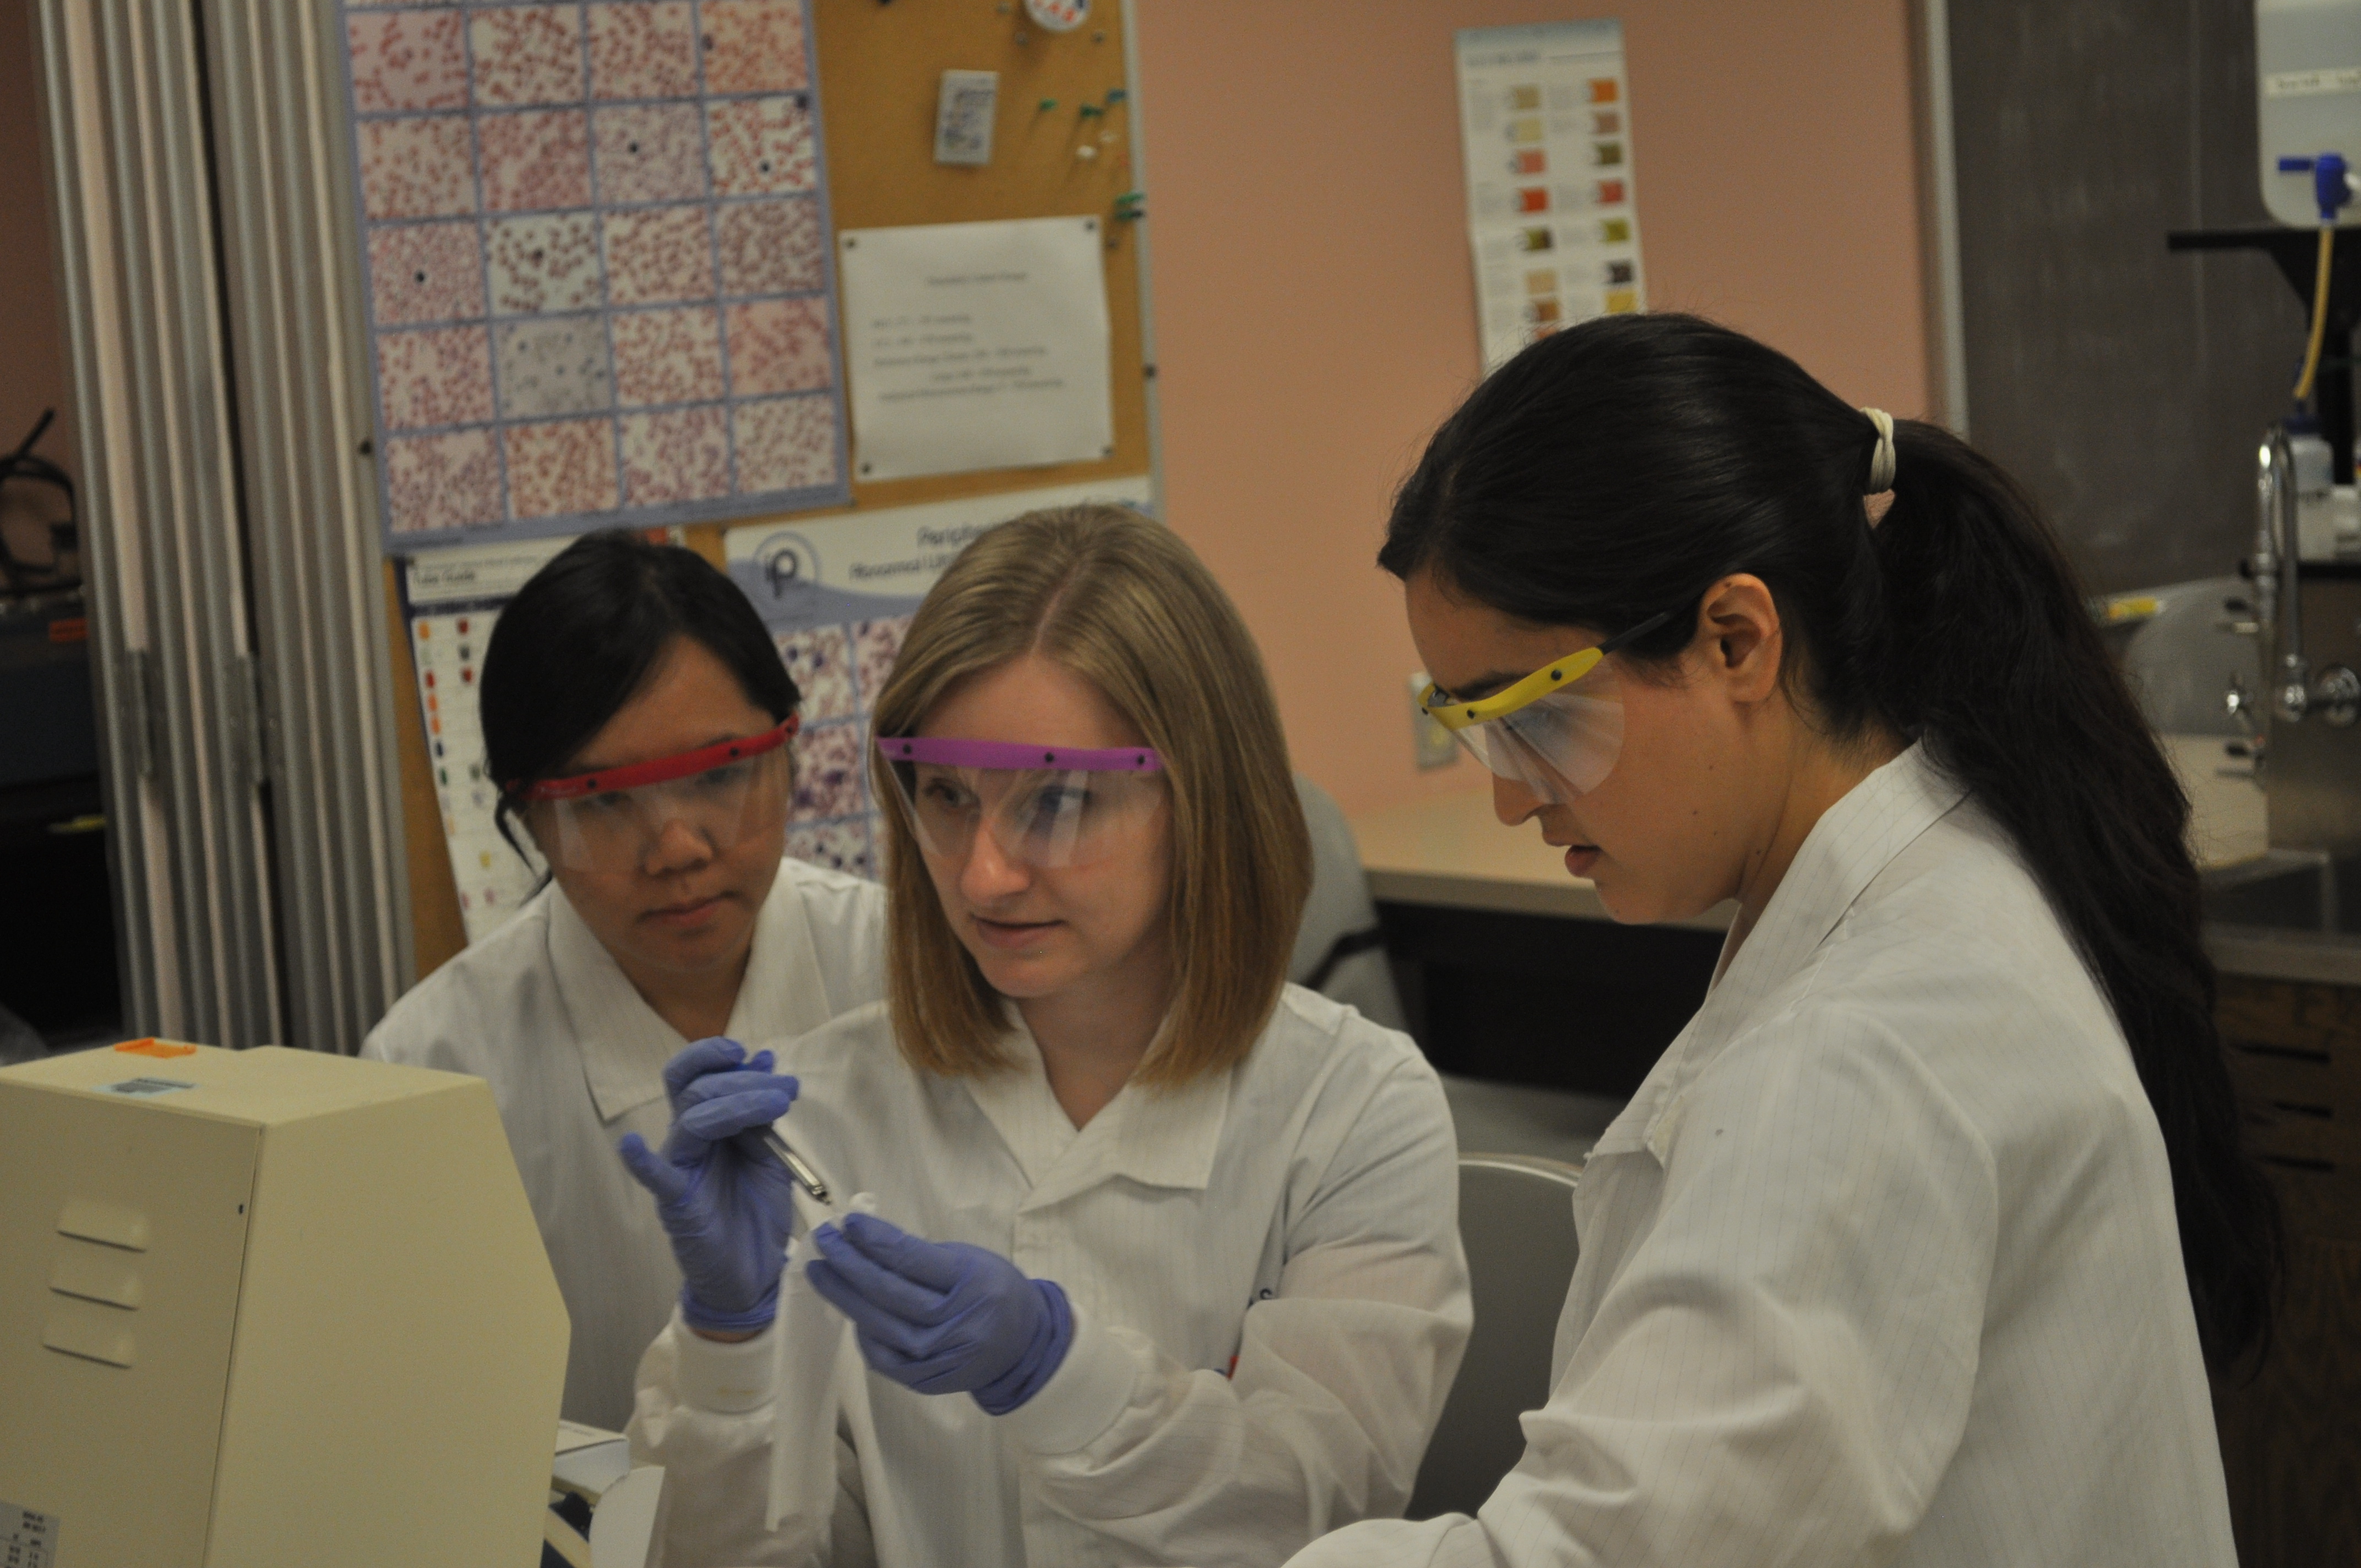 Three students in lab coats and protective glasses